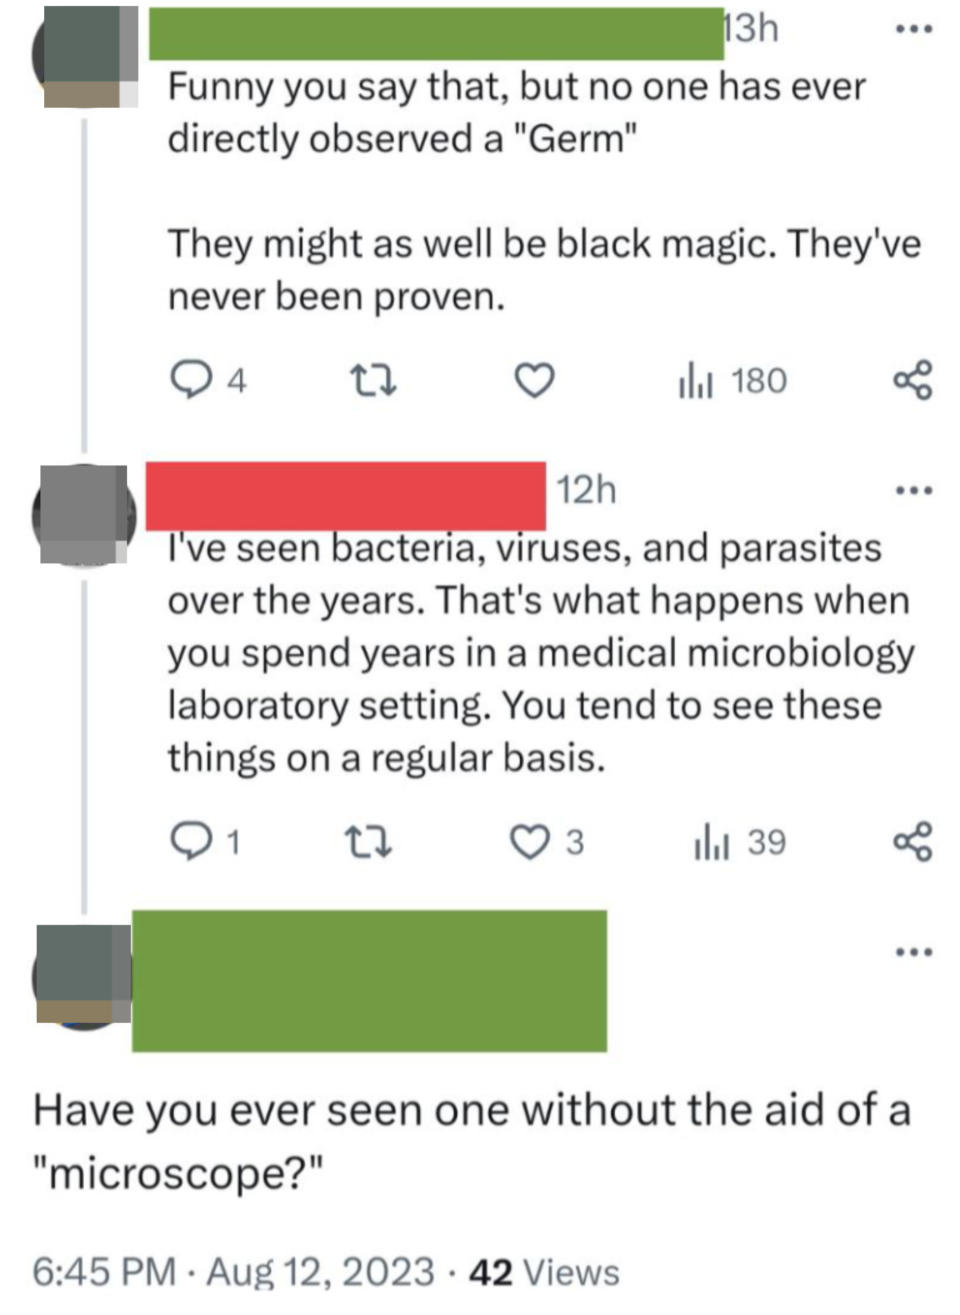 Person says germs may be black magic because "no one has ever directly observed one"; when person says they've seen bacteria, viruses, and parasites from years in a microbiology lab, person asks if they've seen one without a "microscope"